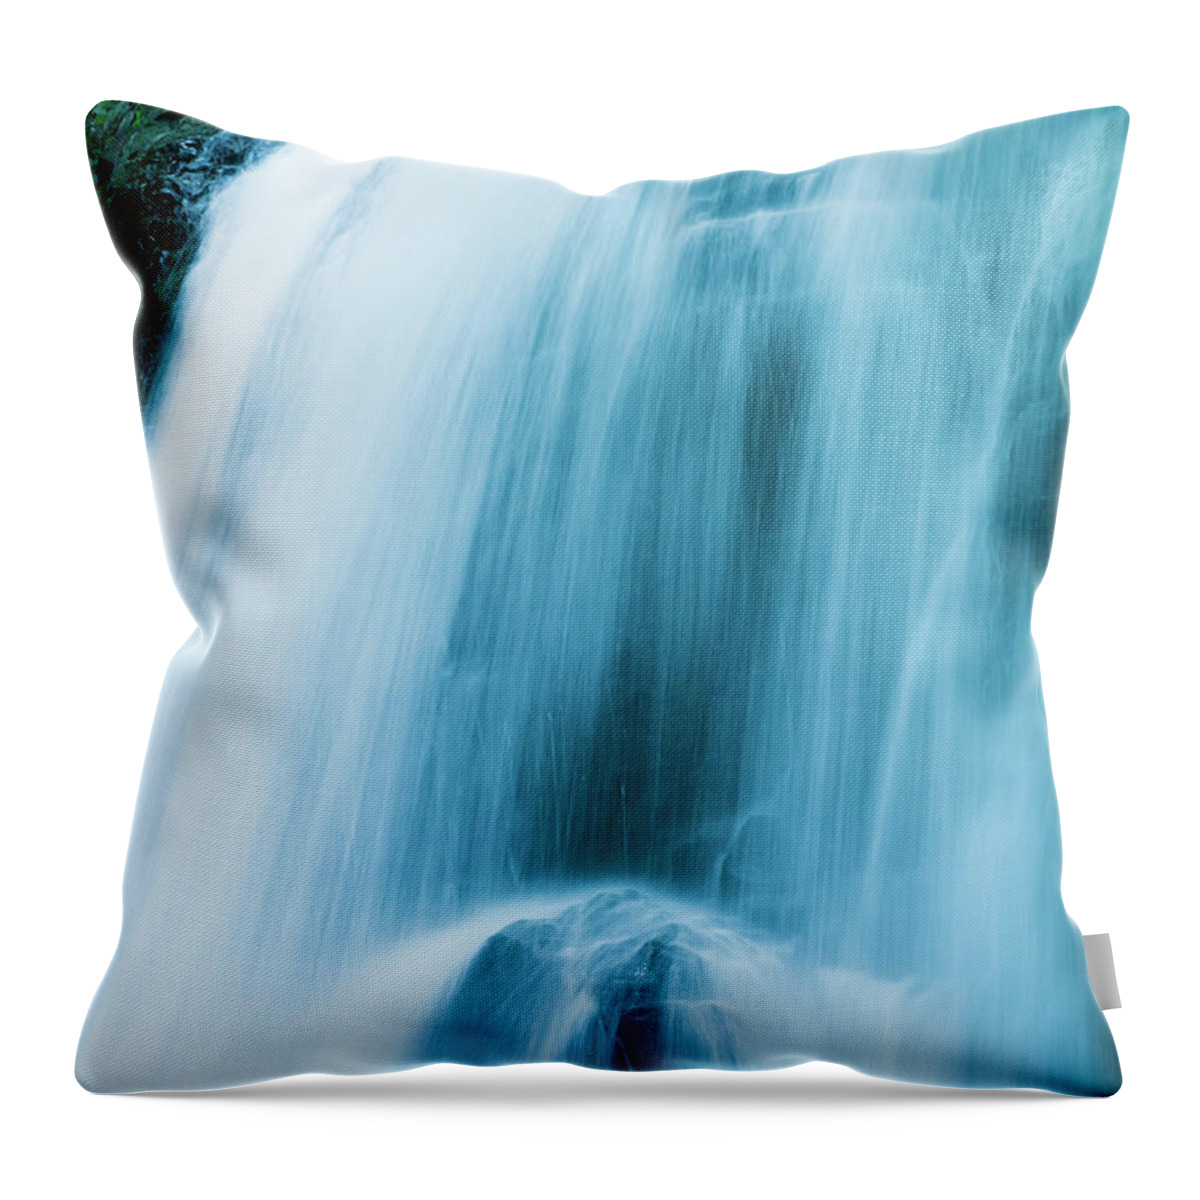 Scenics Throw Pillow featuring the photograph Waterfalls by Ooyoo